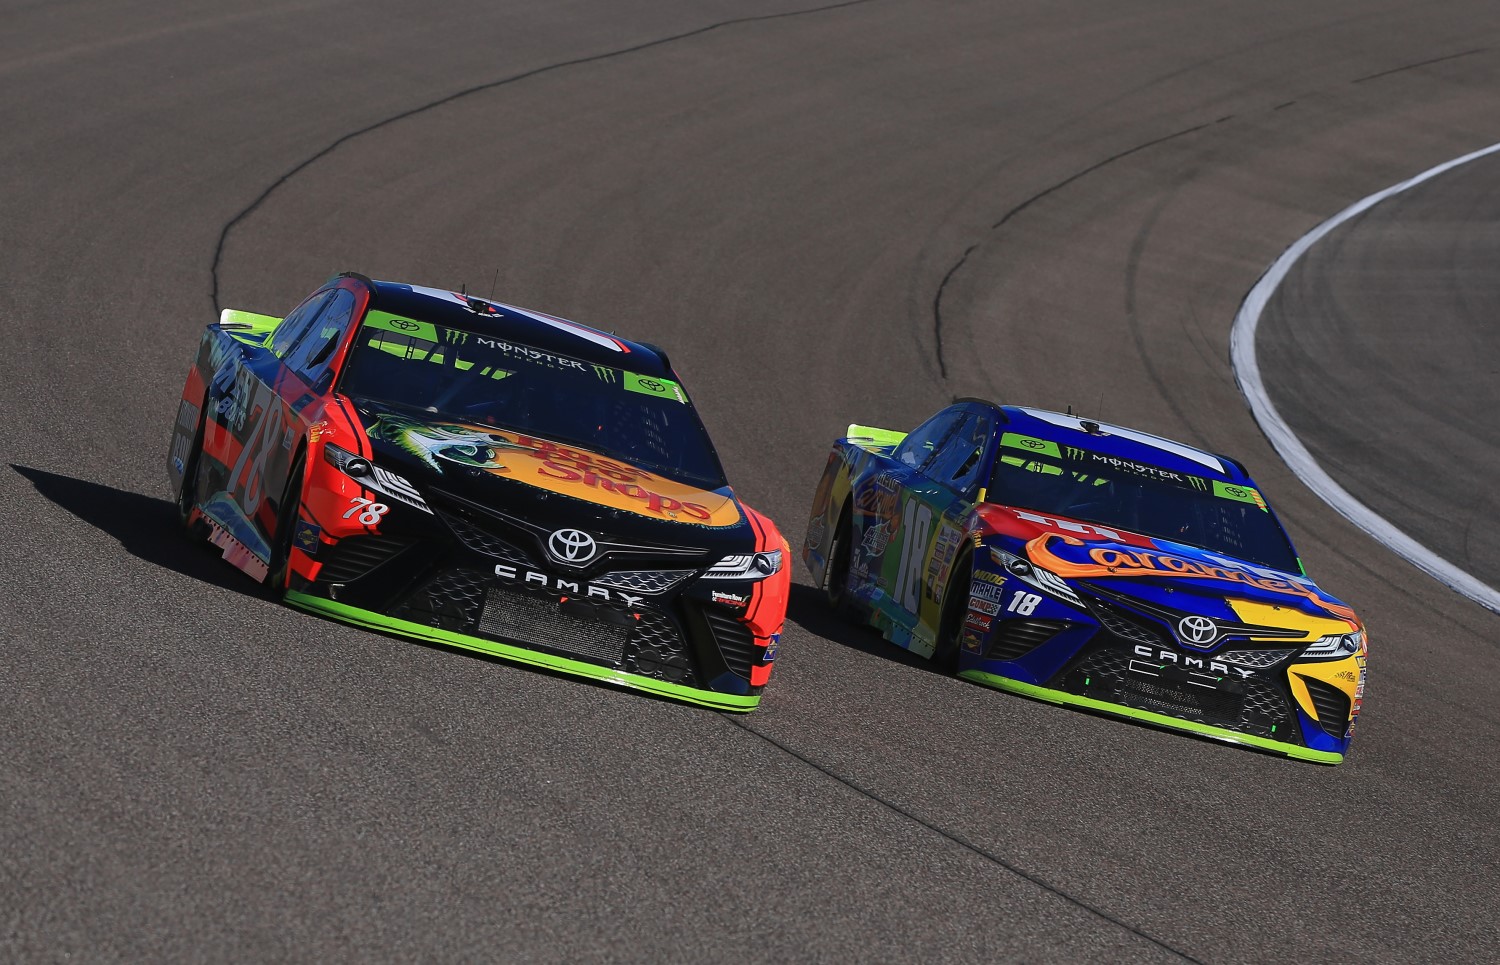 Toyota drivers Martin Truex Jr. and Kyle Busch battle for the title